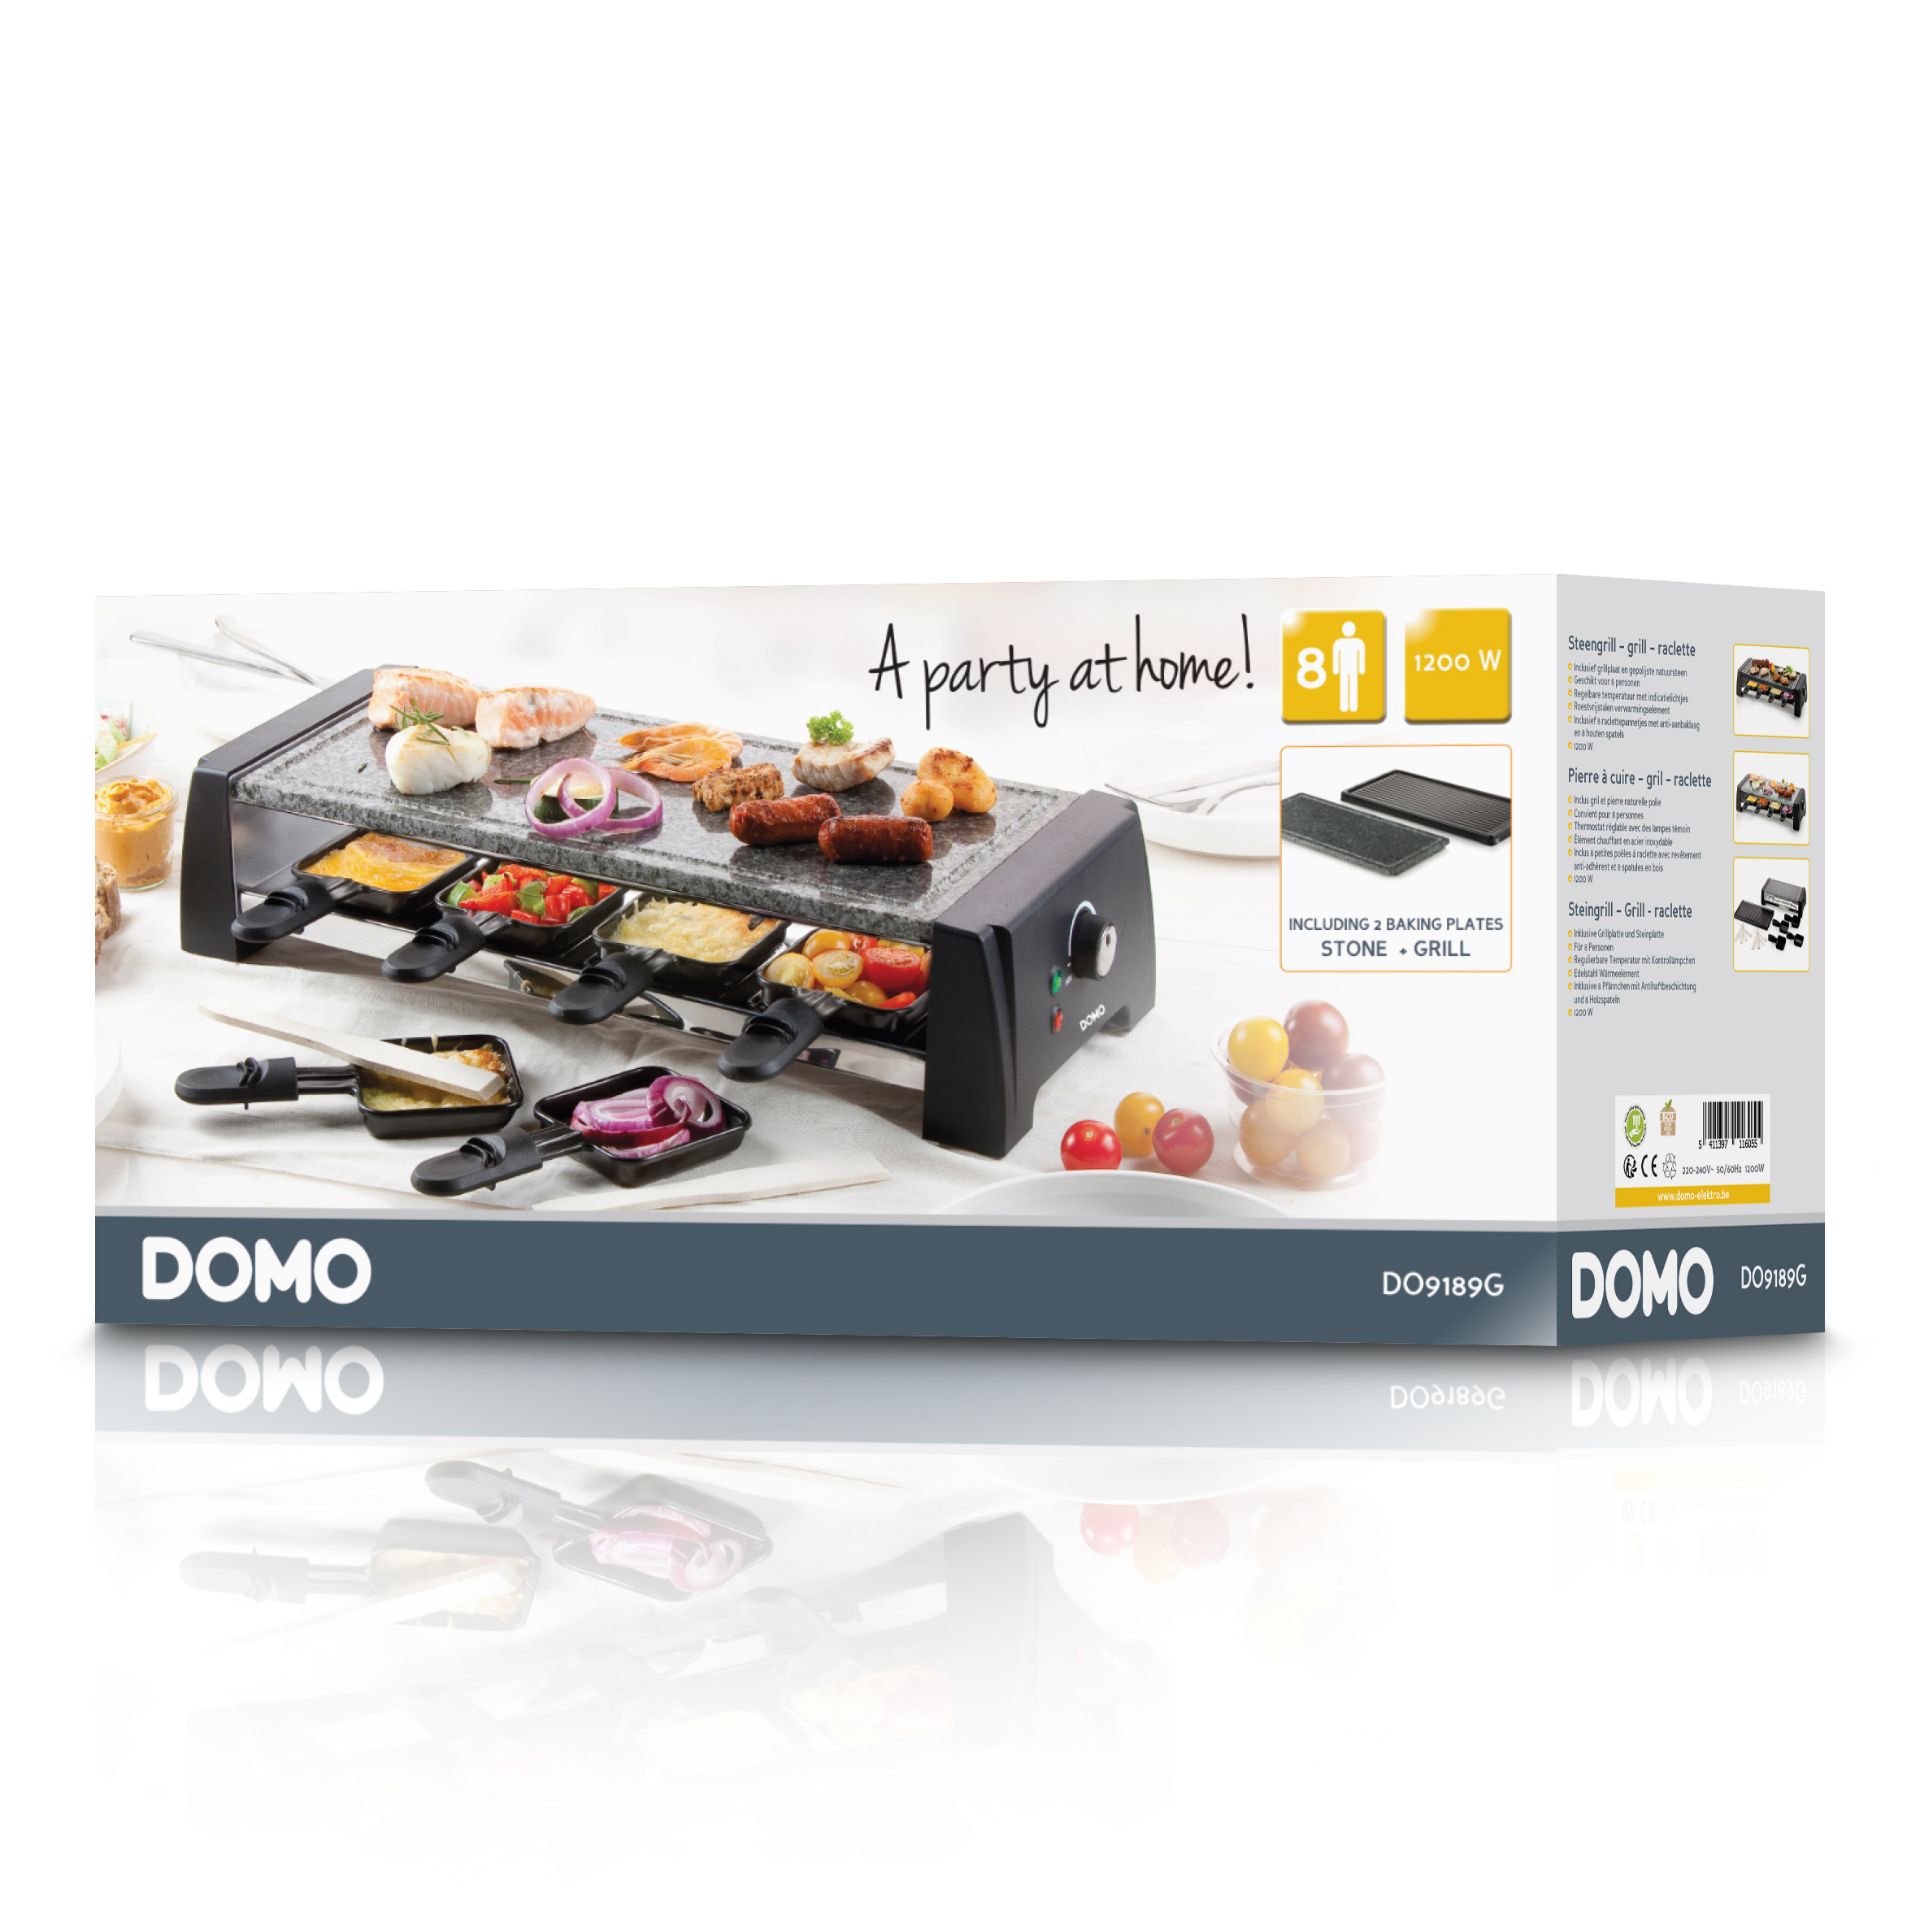 Title: 2 x DO9189G DOMO 8 Person Raclette stone and metal cooking plates with 8 mini pans RRP £ - Image 3 of 3